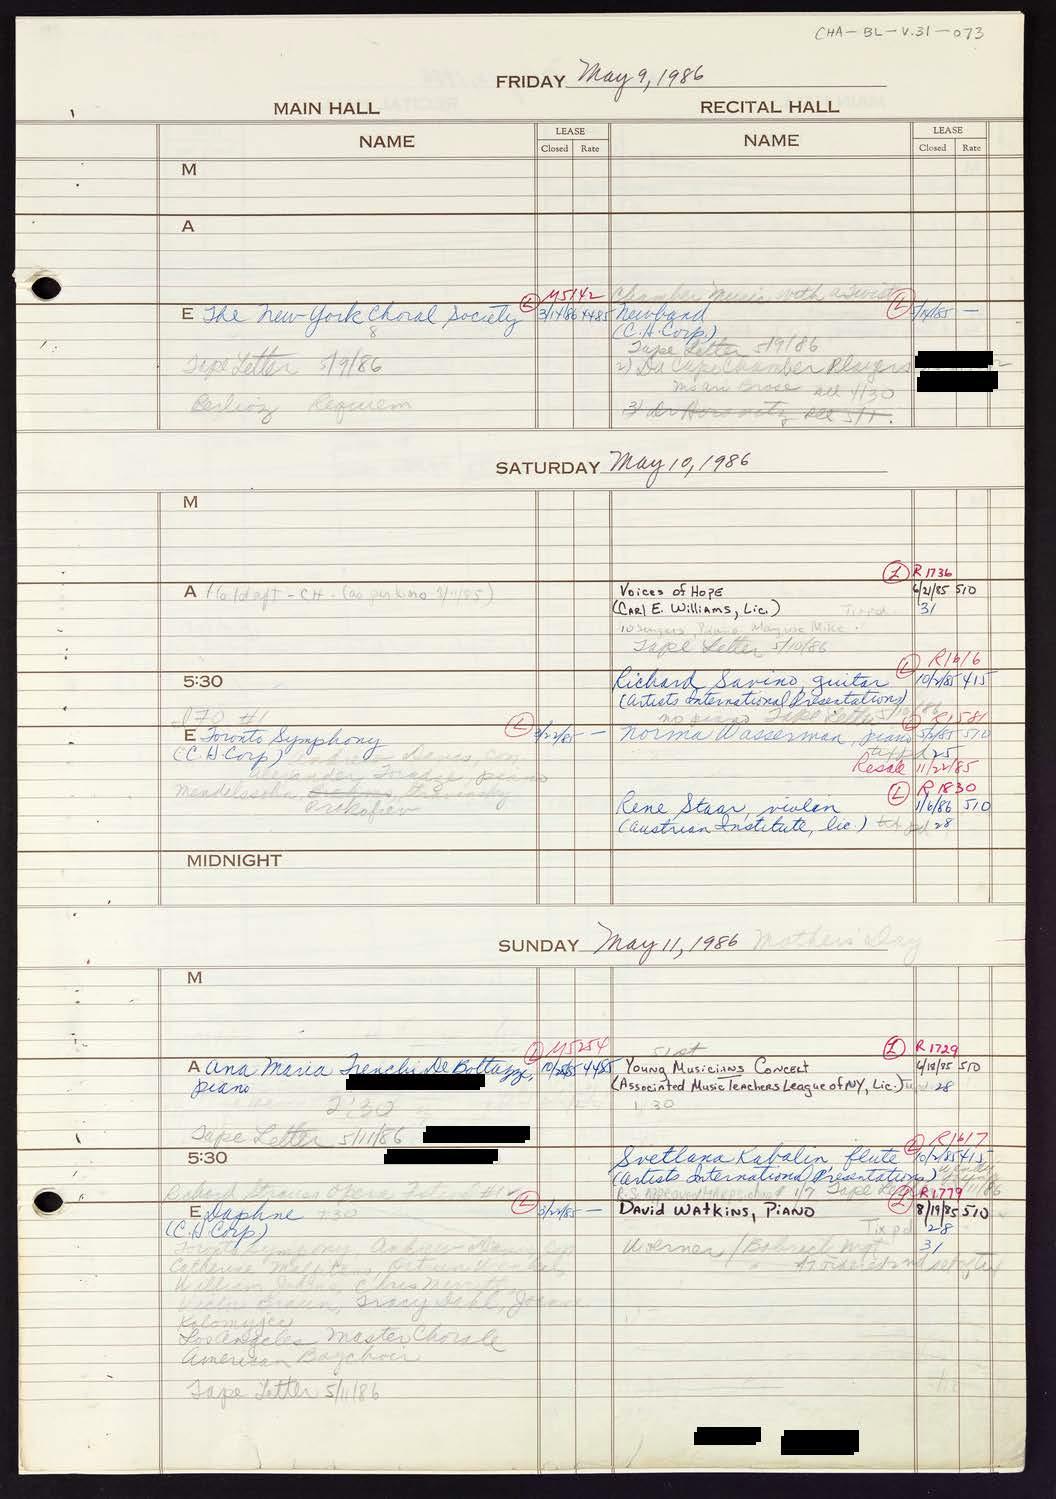 Carnegie Hall Booking Ledger, volume 31, page 73